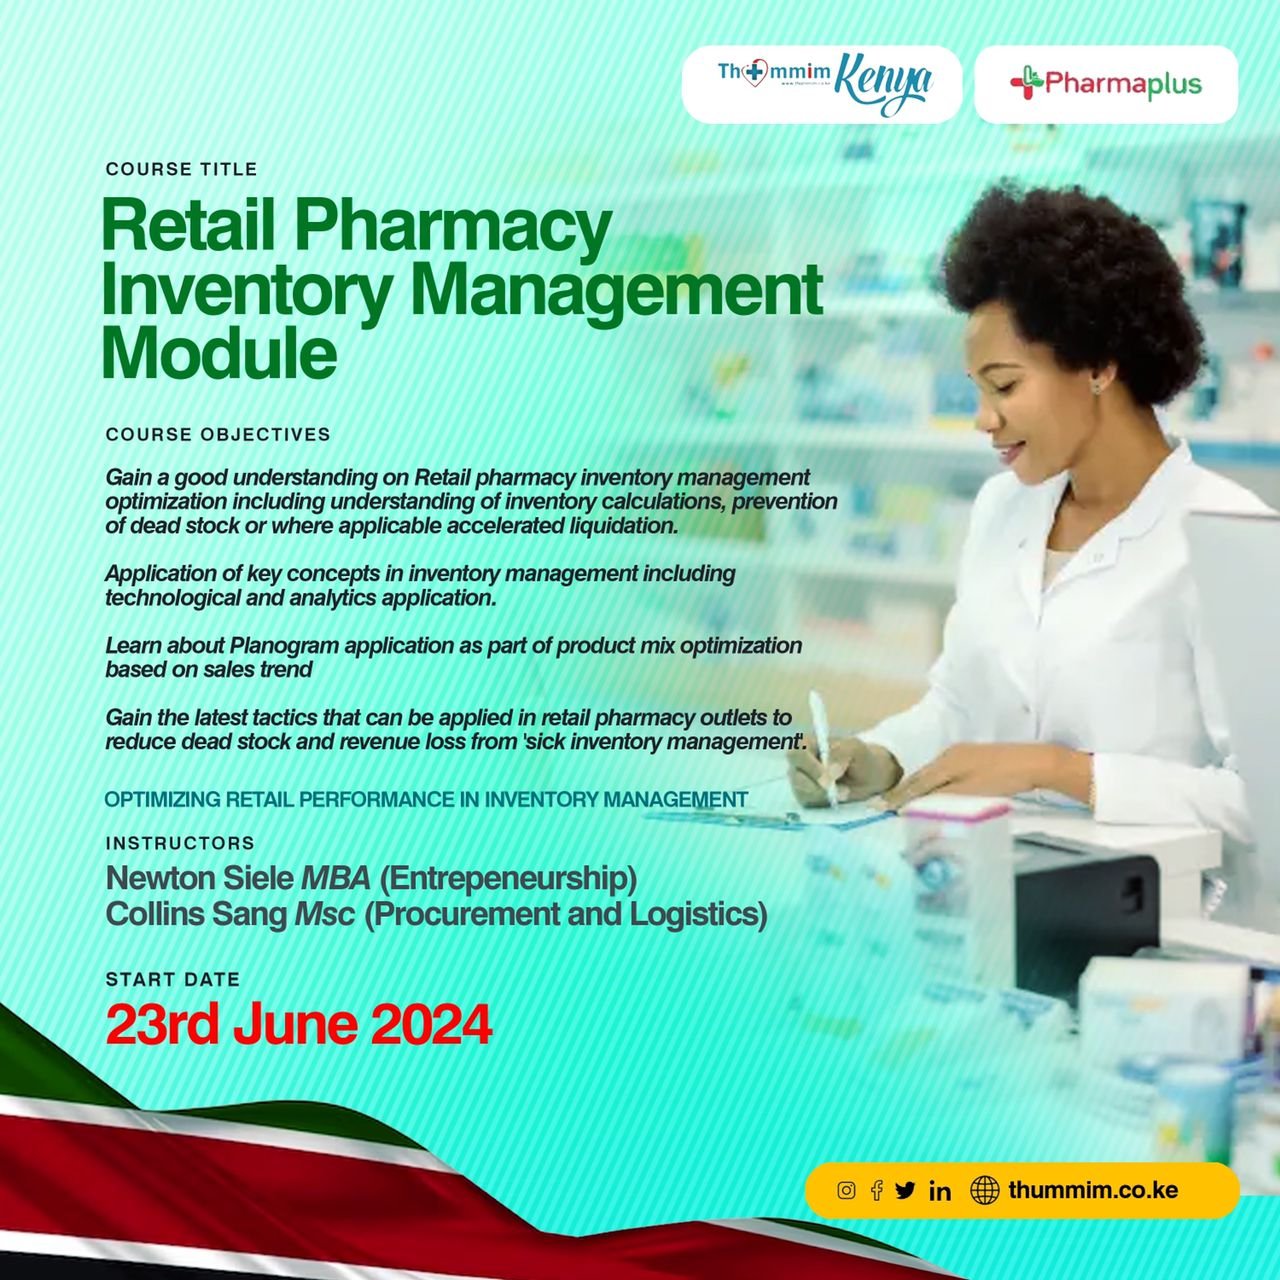 Retail Pharmacy Inventory Management Course